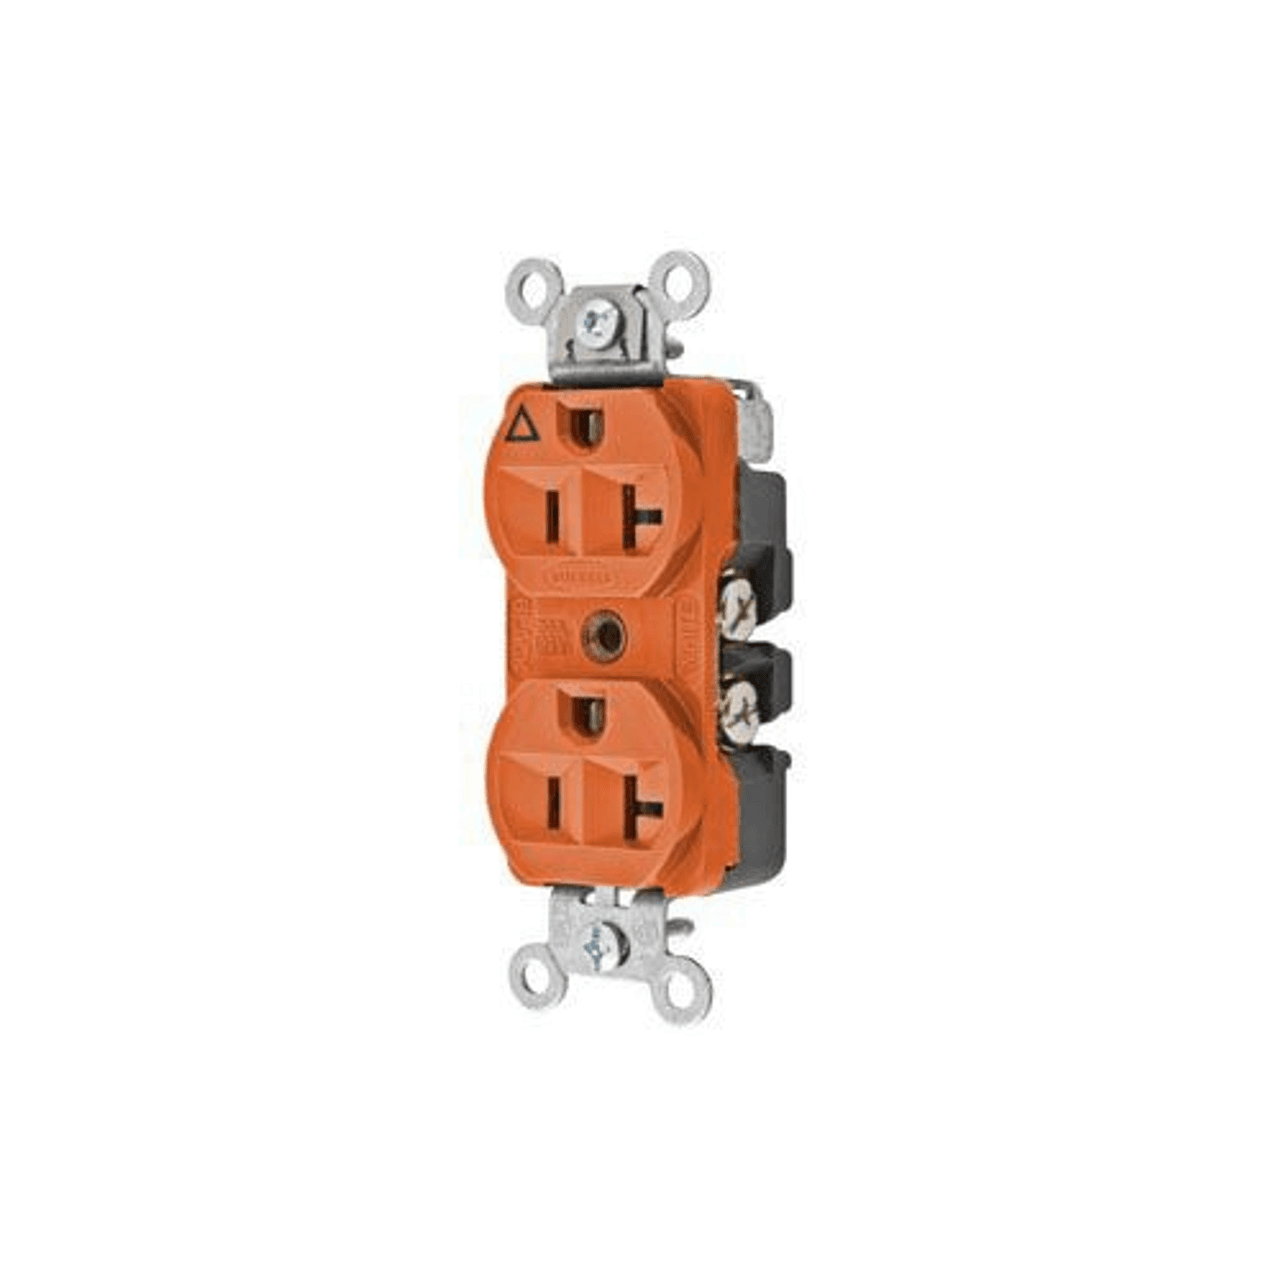 Hubbell CR5352IGW Straight Blade Devices, Receptacles, Duplex, Hubbell-Pro Heavy Duty, 2-Pole 3-Wire Grounding, 20A 125V, 5-20R, White, Single Pack, Isolated Ground.  ; Triangle marking on face indicates isolated ground ; Slender/compact design ; Finder Groove Face ; Isola